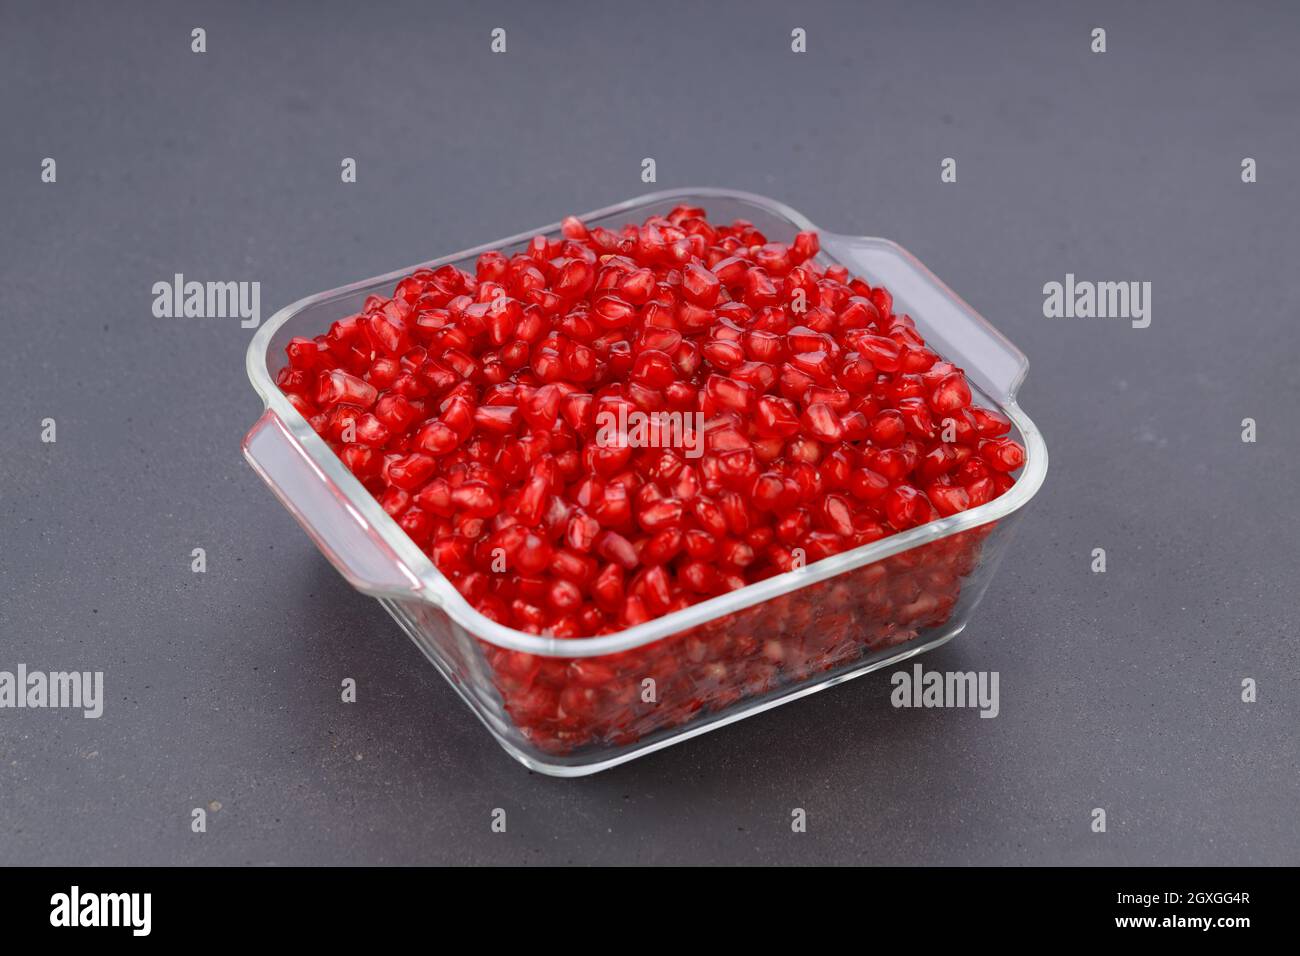 Fresh Pomegranate seed arranged in a square glass container on black background, isolated. Stock Photo